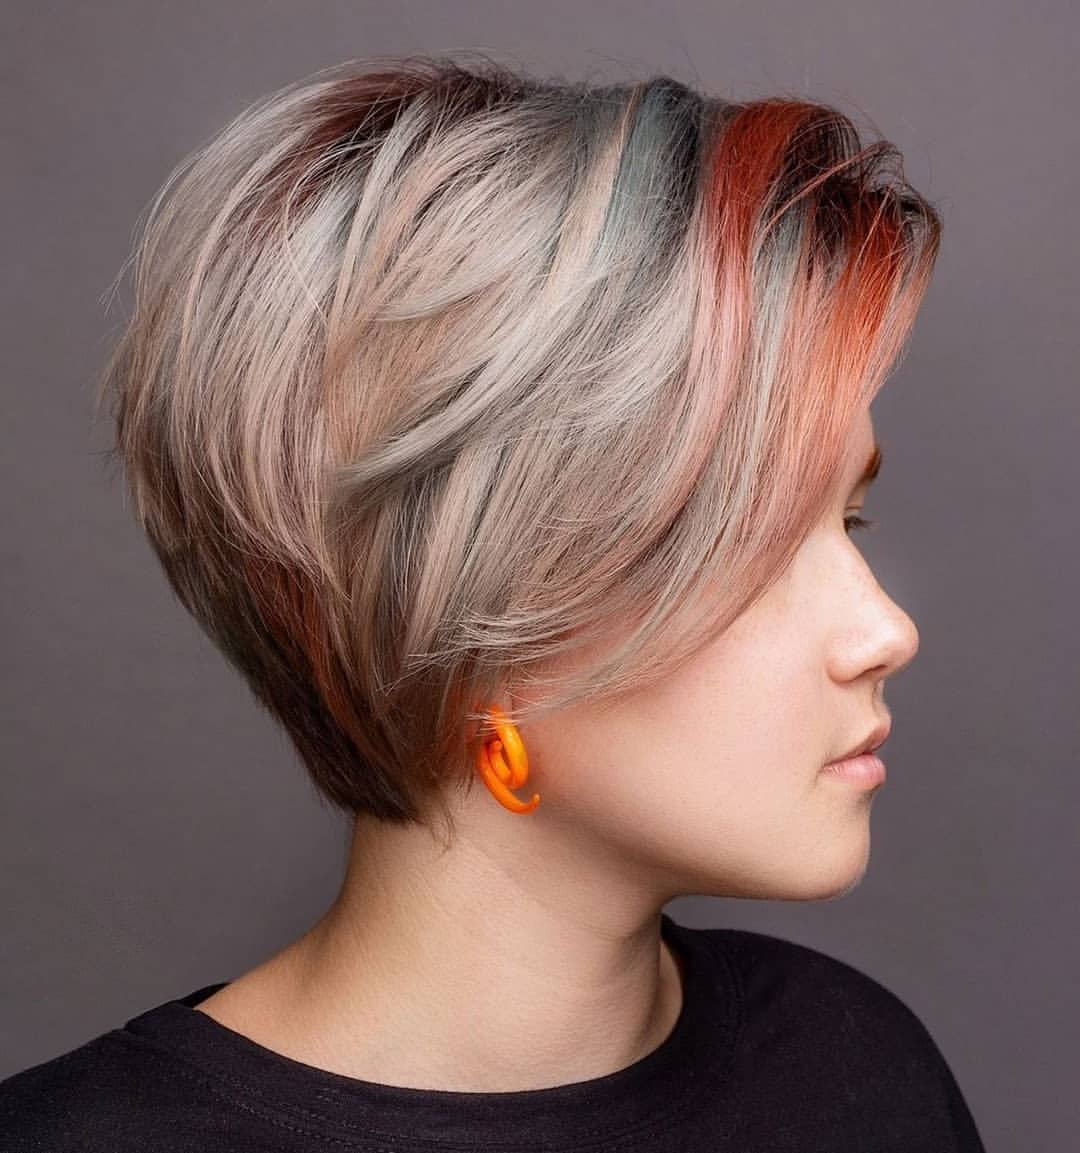 100+ Most Edgy Short Hairstyles for Women 2021 How To Do Easy